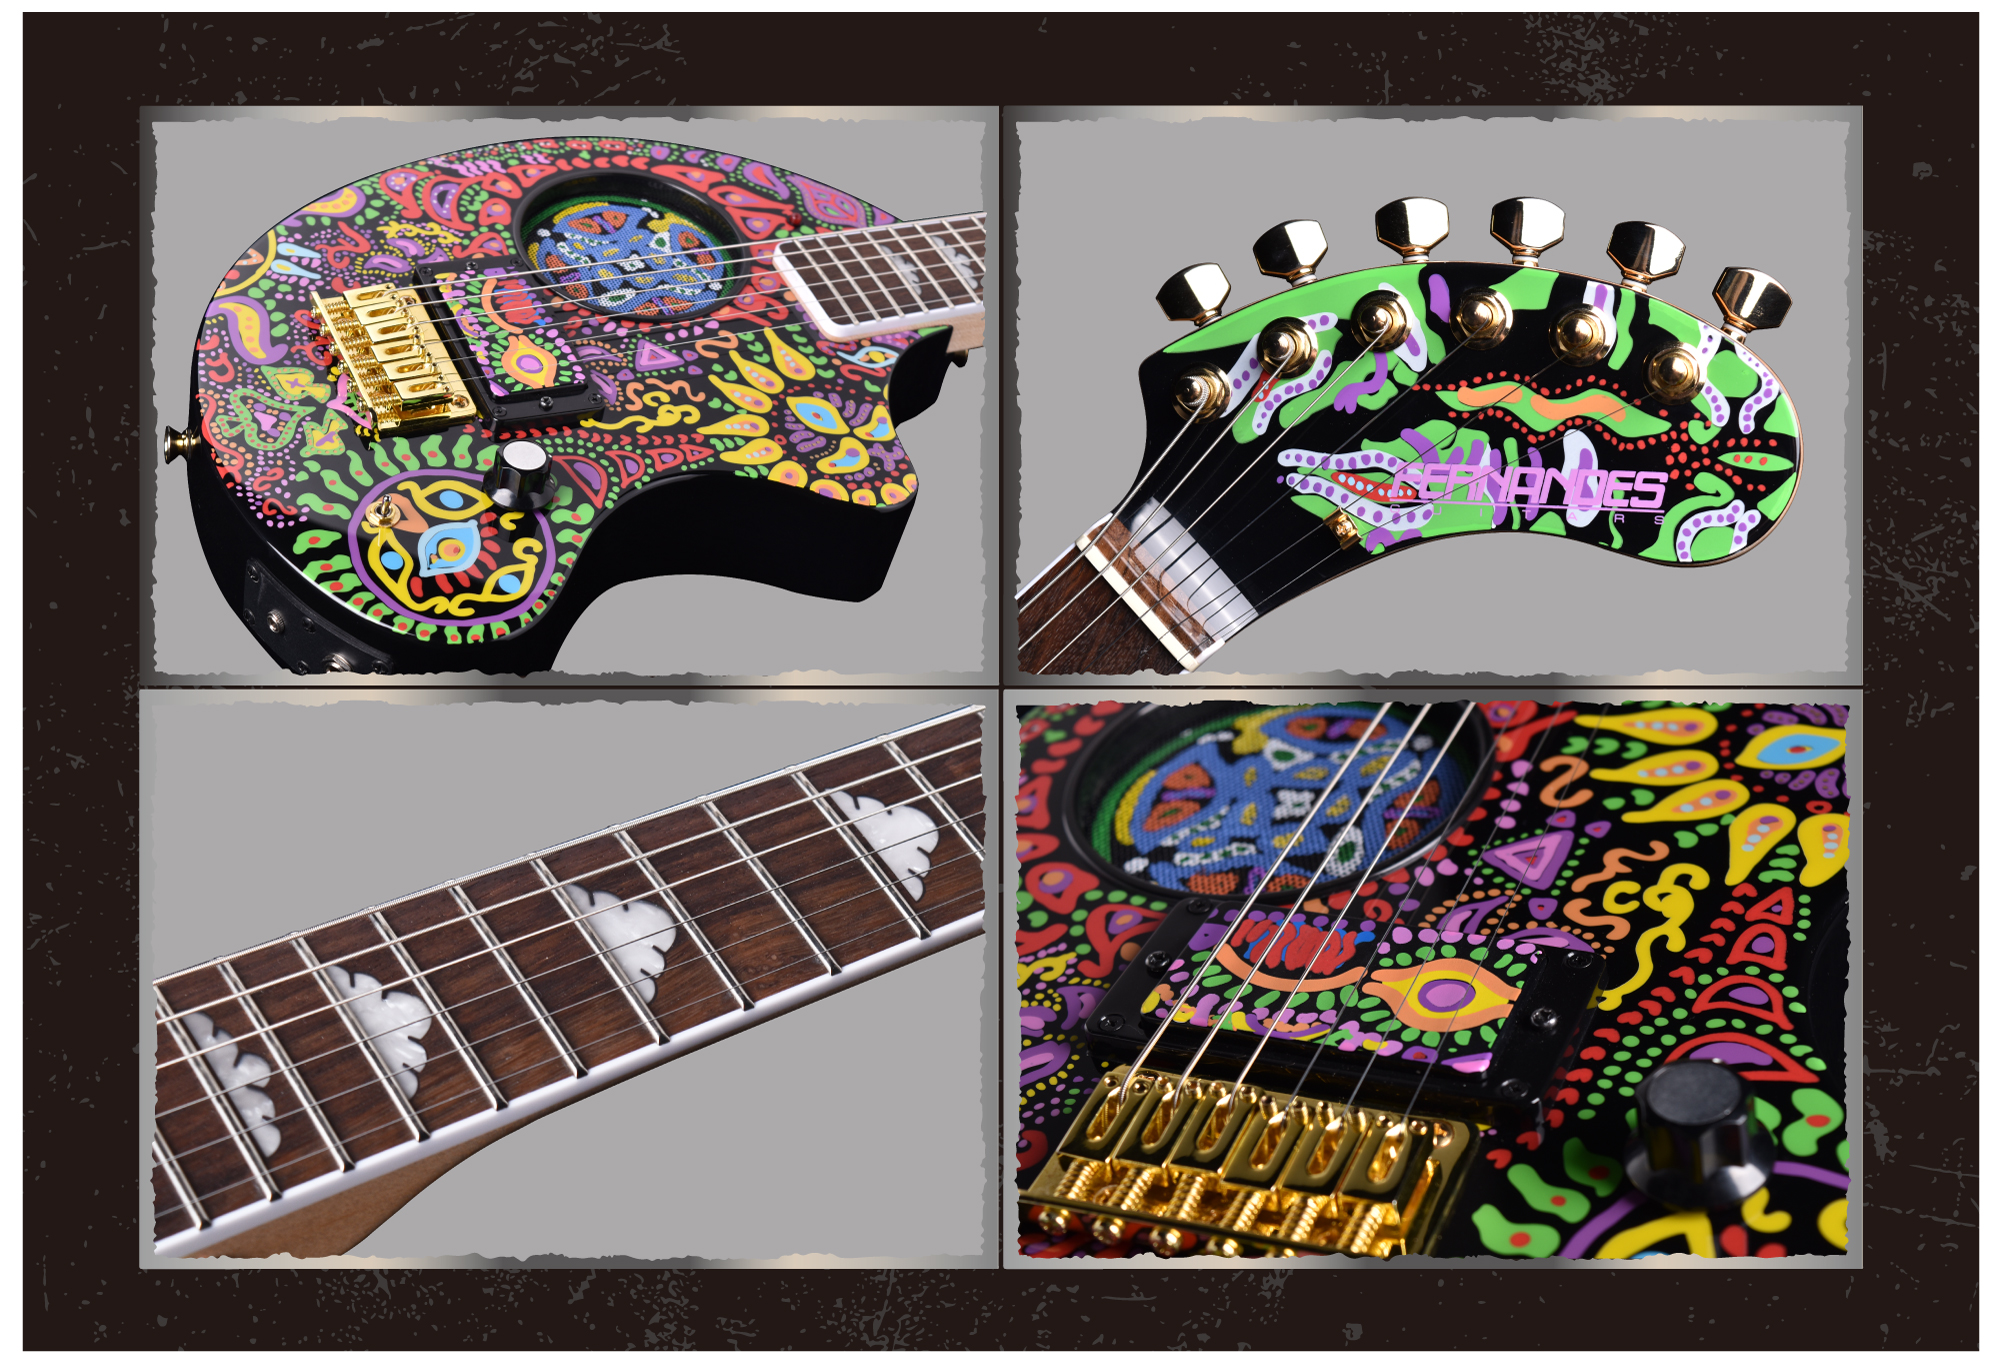 PAINT-ZO 発売決定!! | FERNANDES OFFICIAL WEB SITE